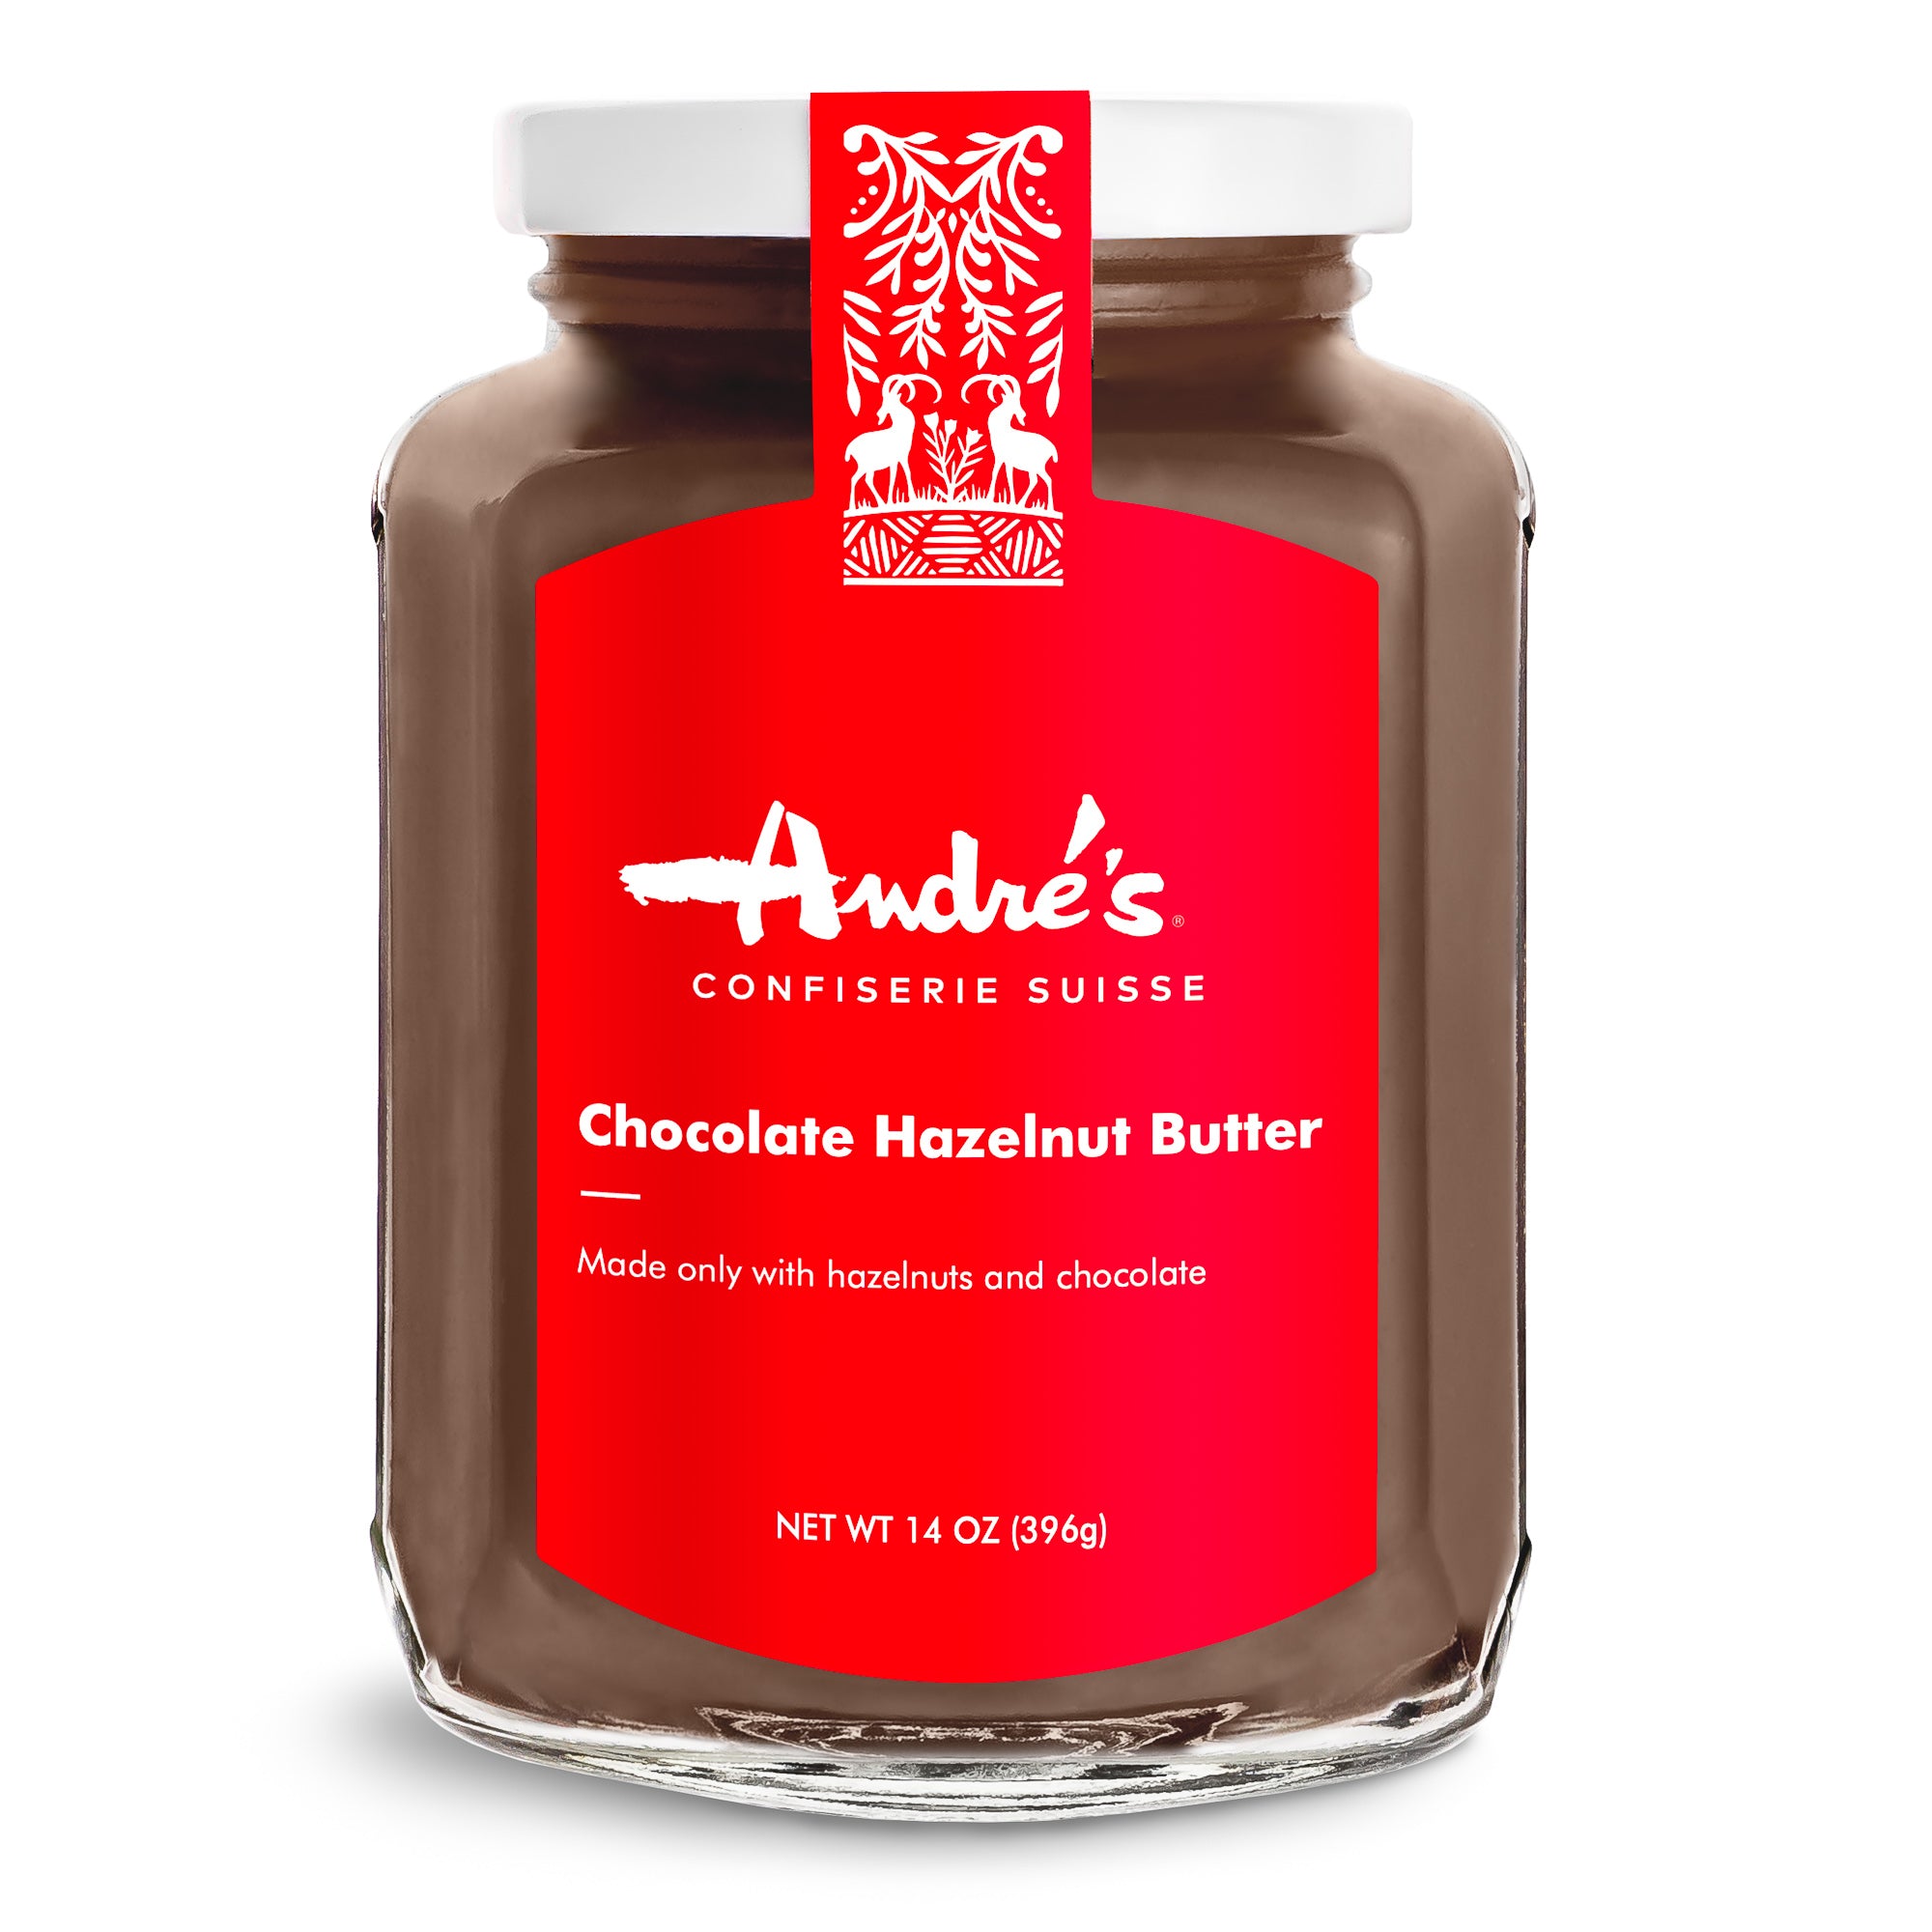 Housemade Nut Butters